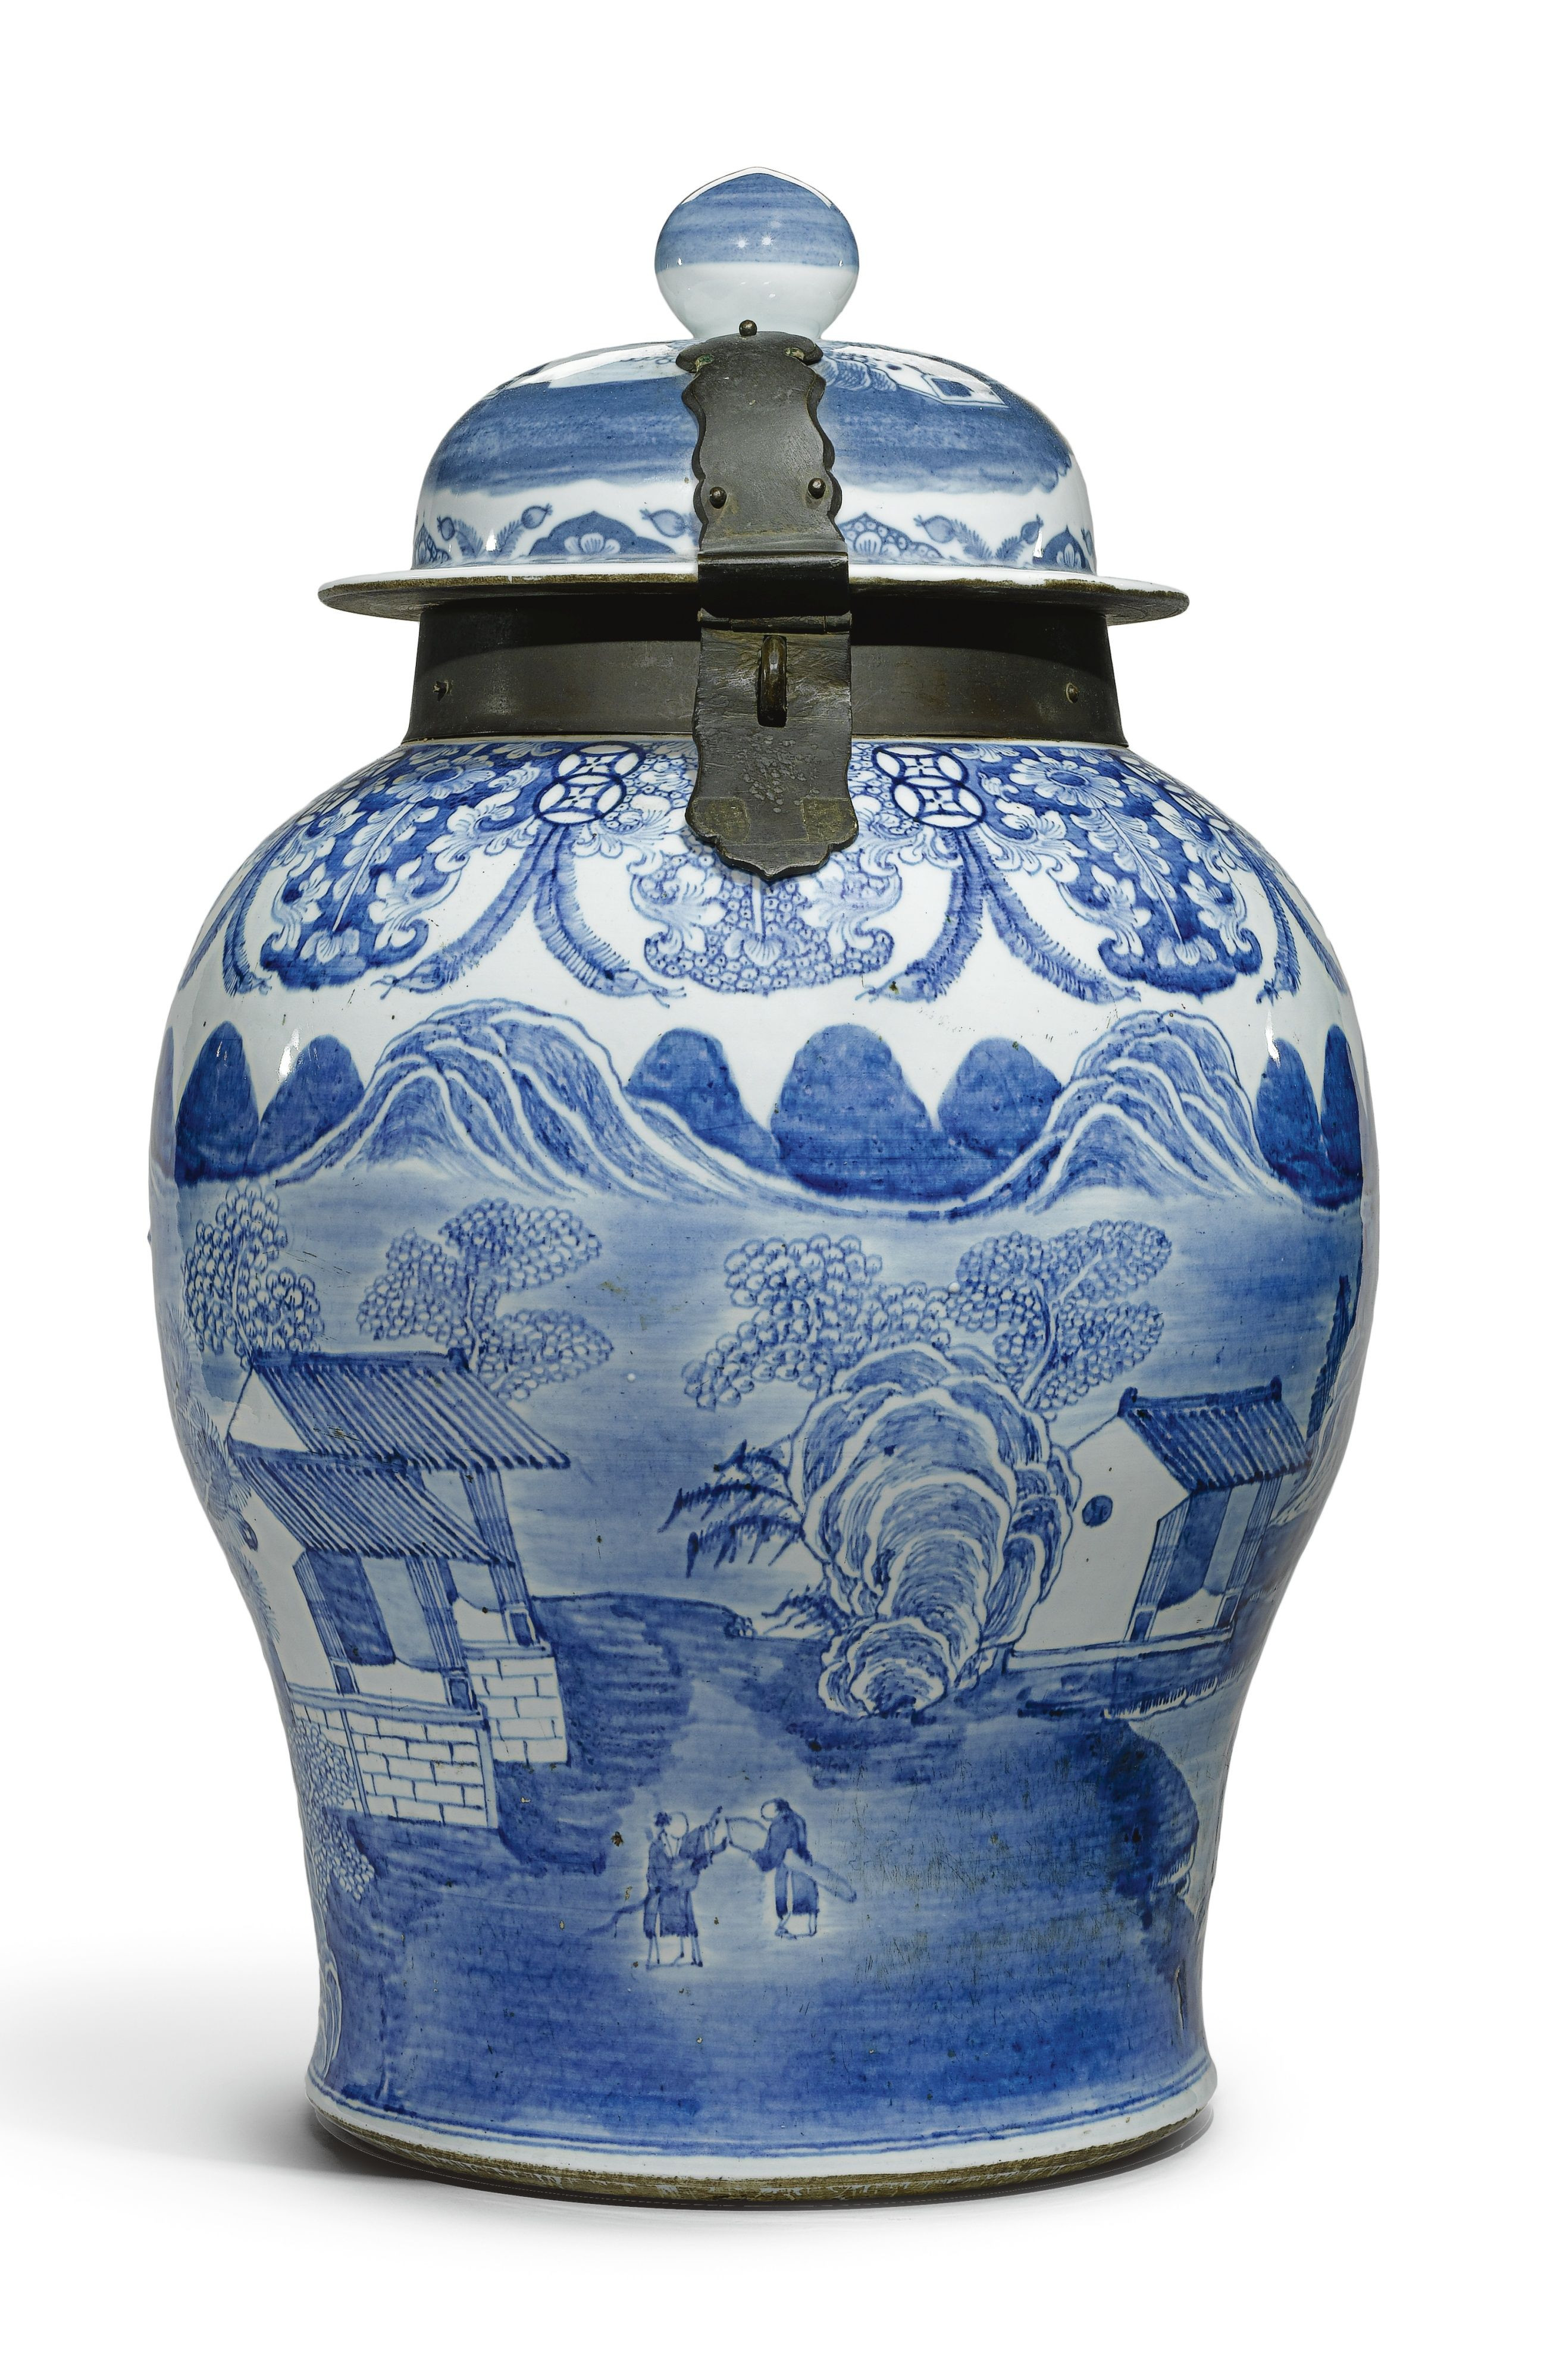 25 Recommended Large White Vases Online 2023 free download large white vases online of a large metal mounted blue and white vase and cover qing dynasty in vase